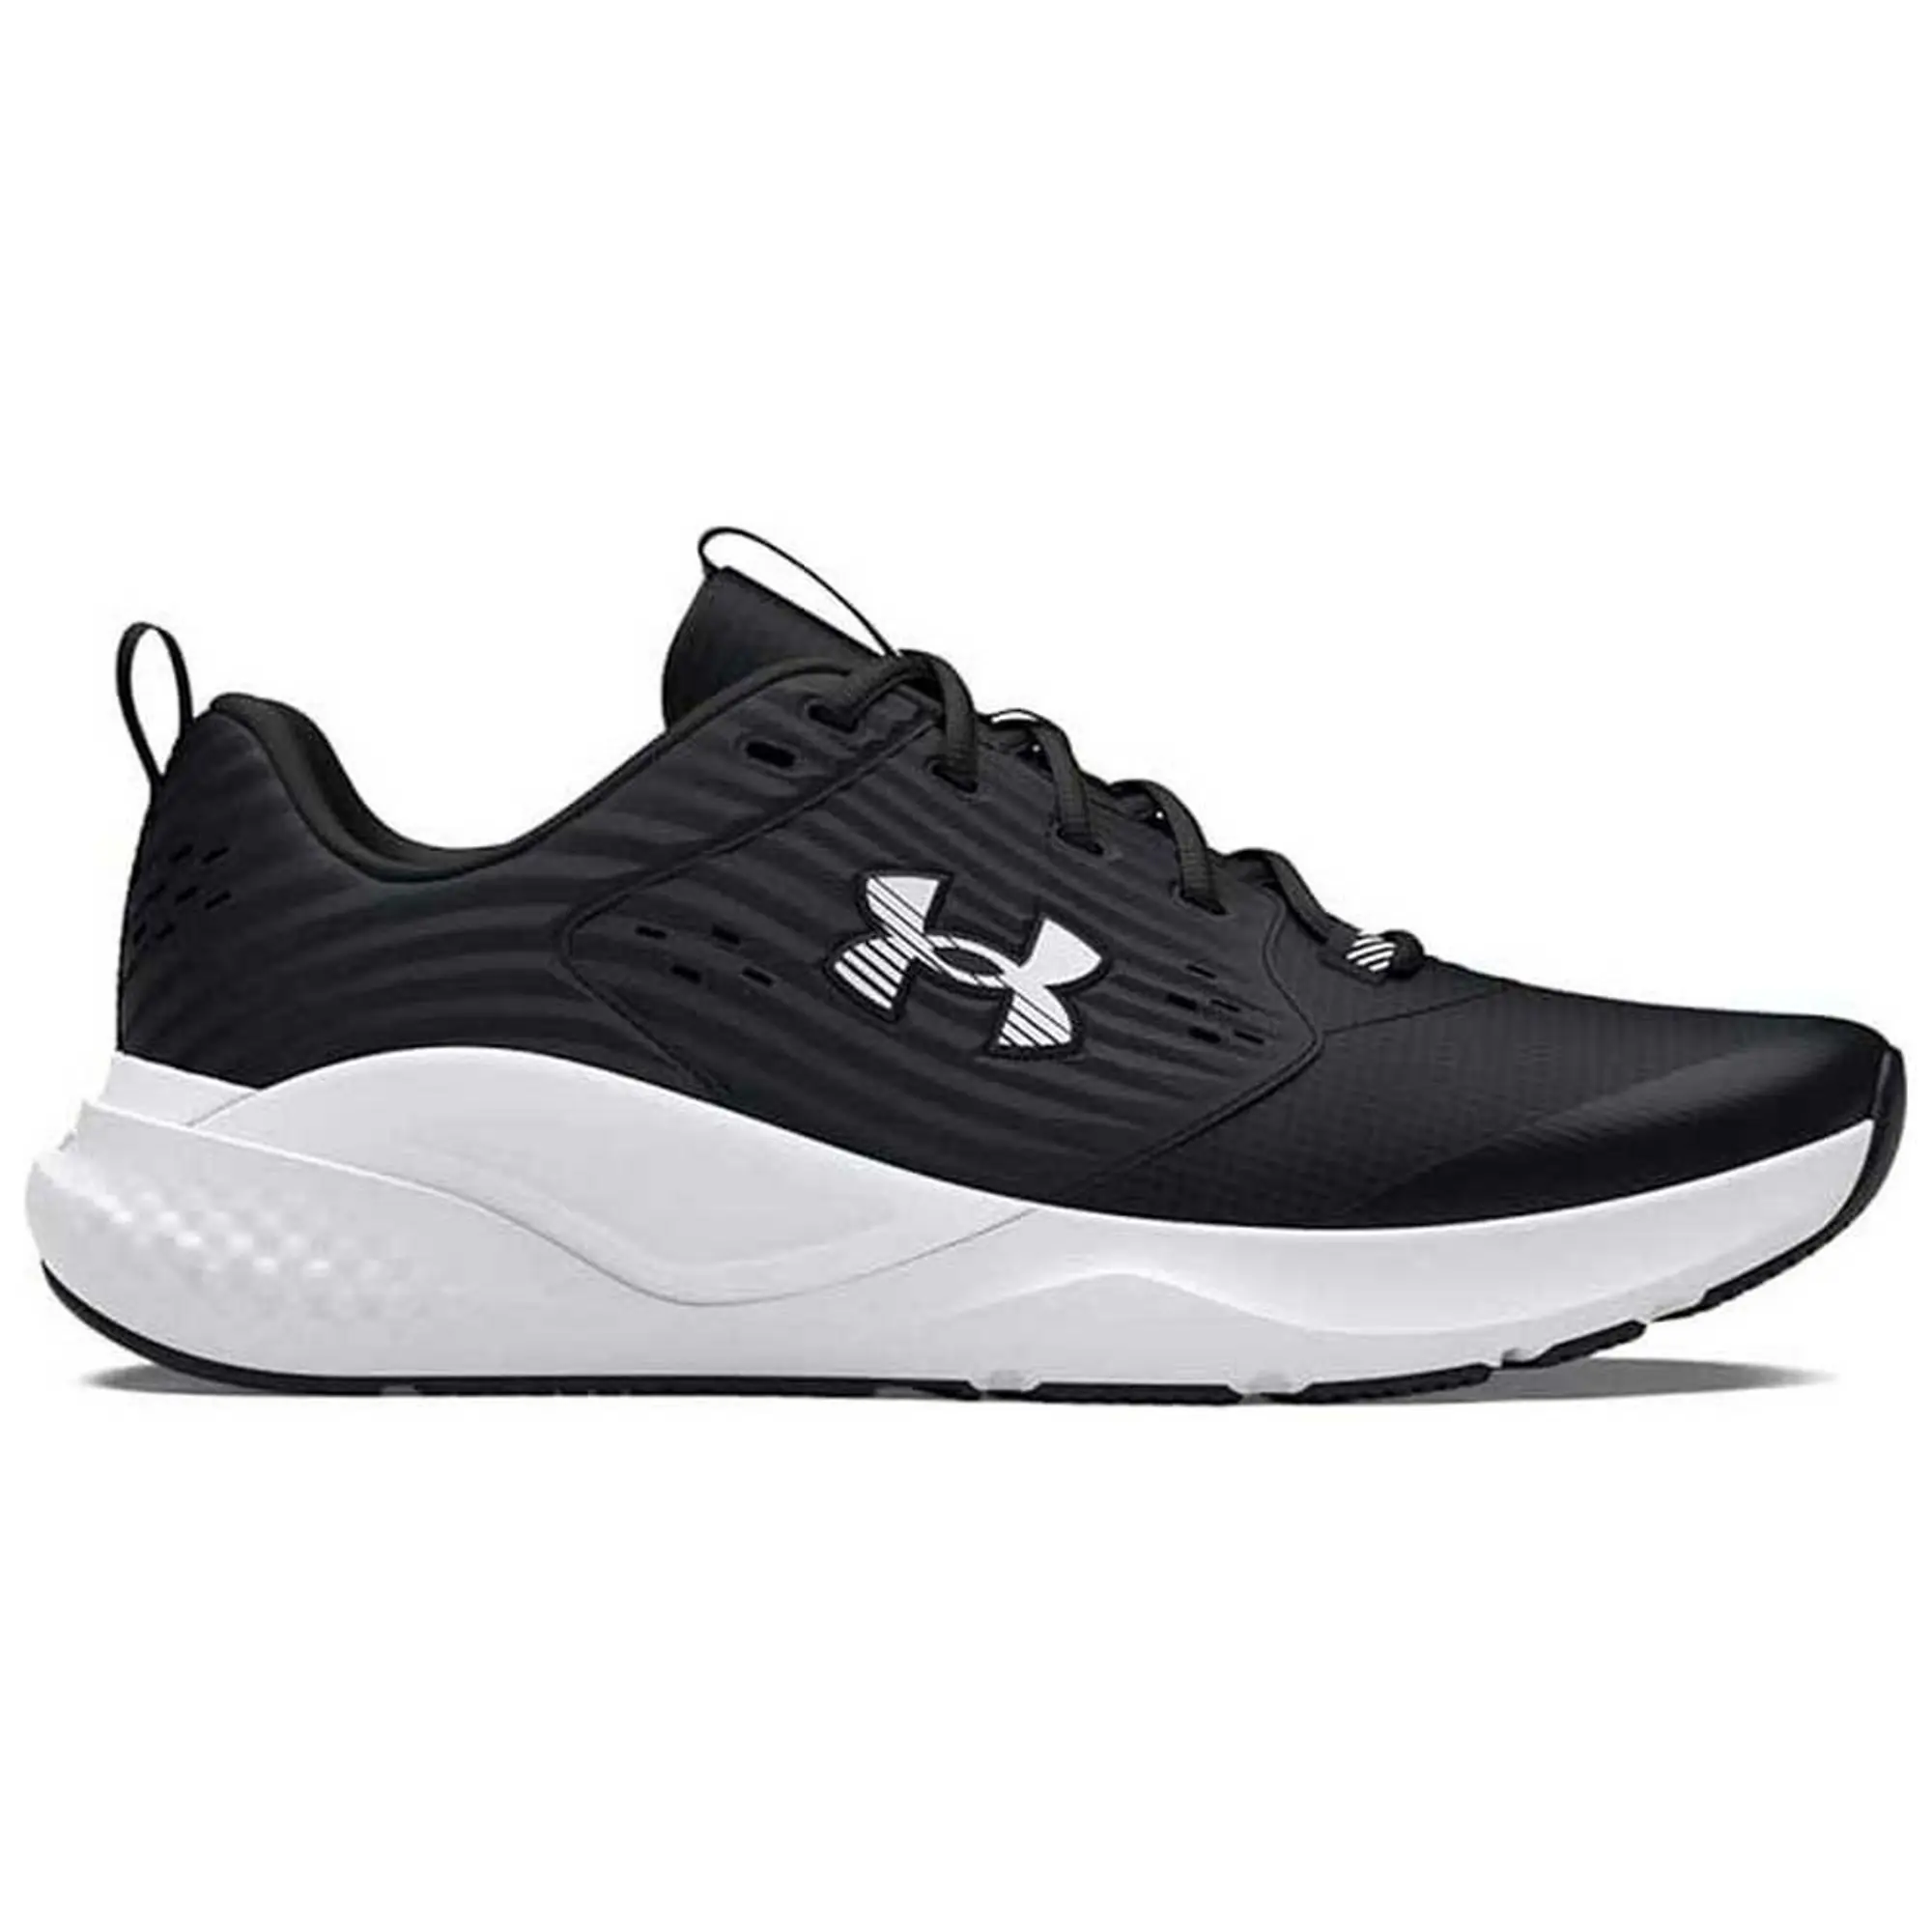 UNDER ARMOUR Mens Training Charged Commit Trainers - Black/White, Black/White